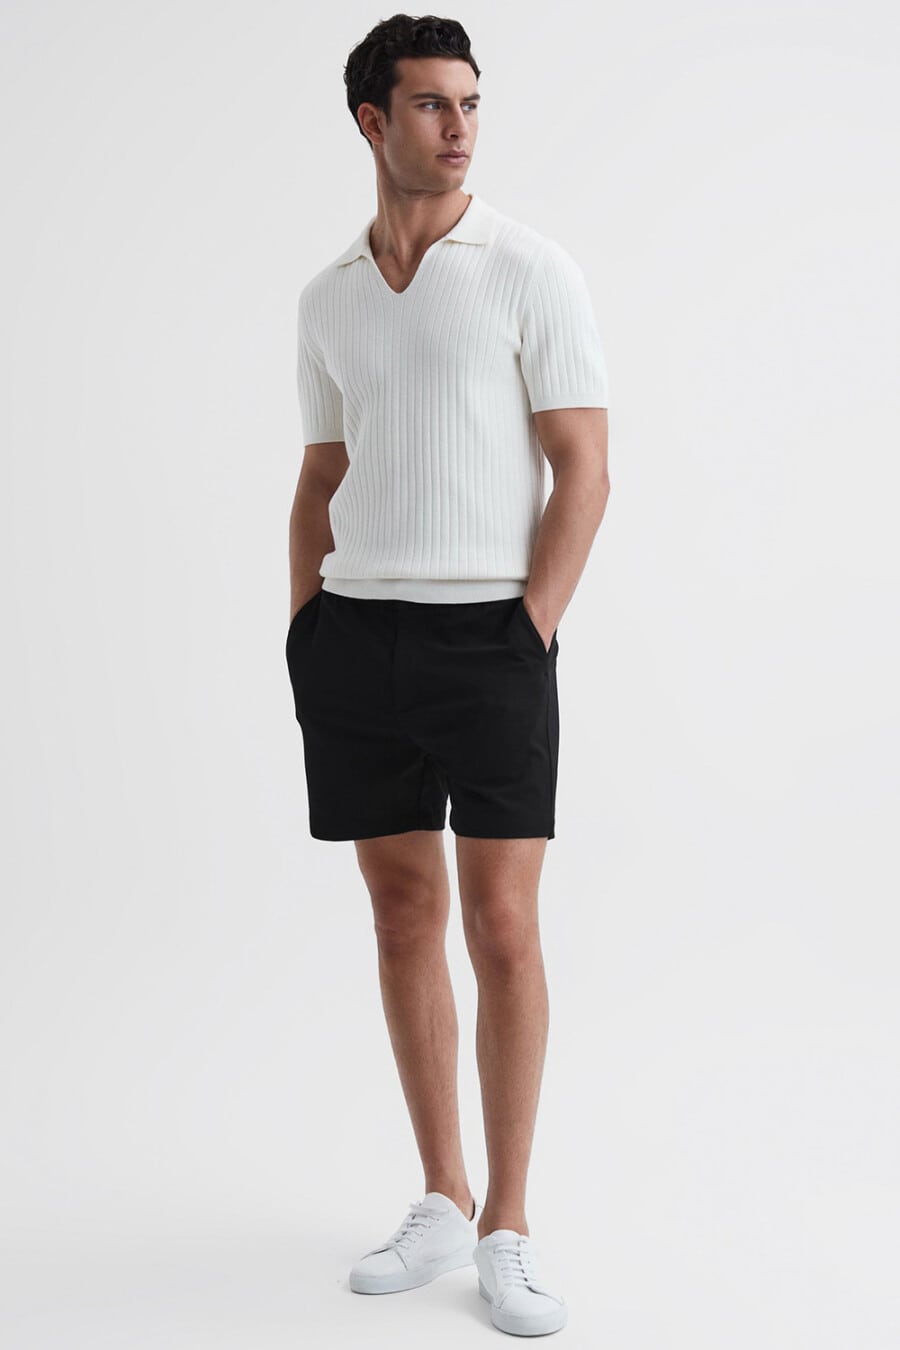 Men's black tailored shorts, white ribbed polo shirt and white sneakers worn sockless outfit